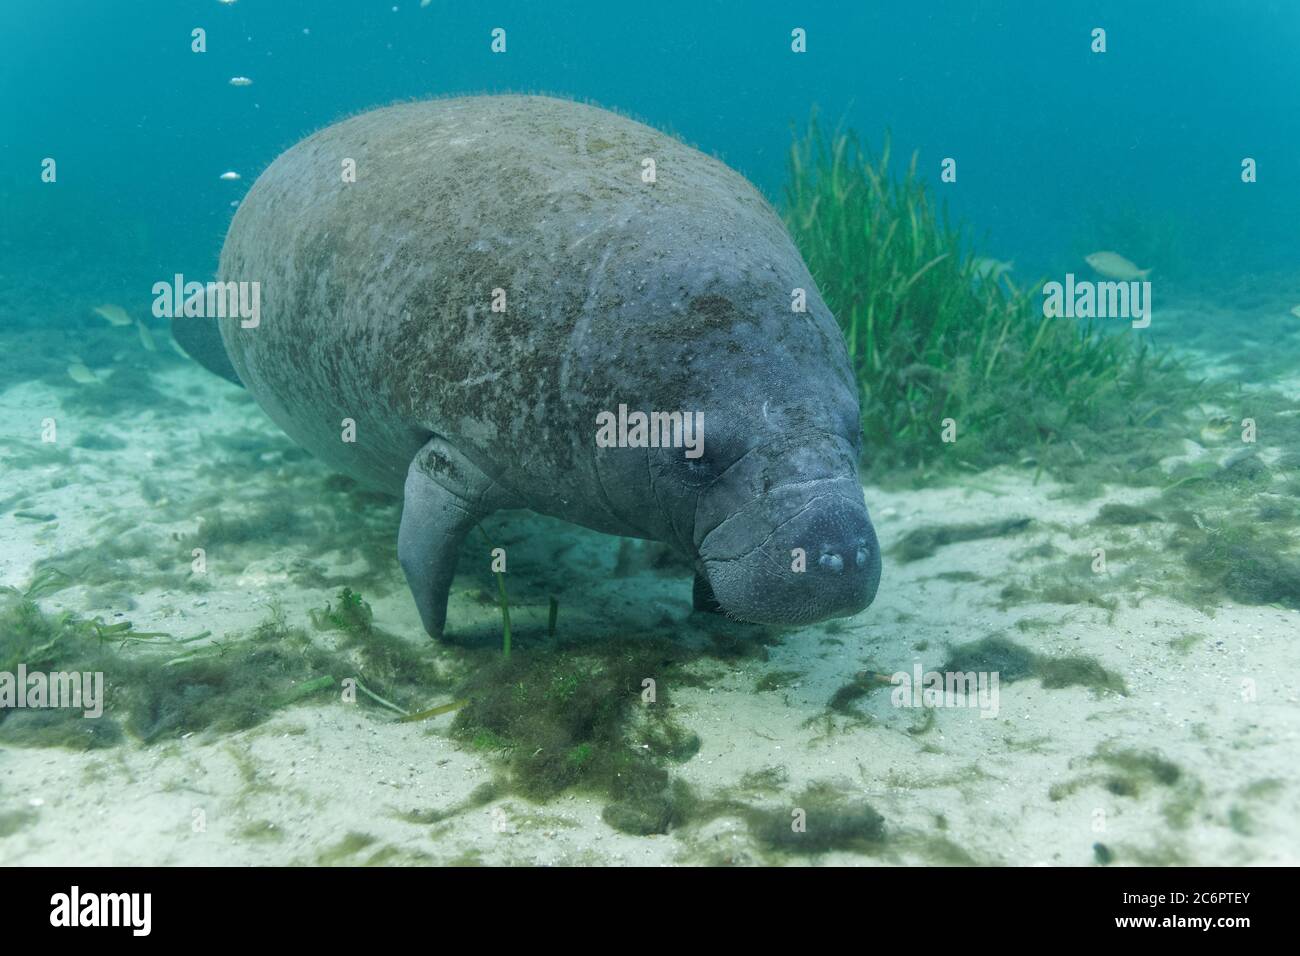 A curious young West Indian Manatee calf (trichechus manatus) approaches an underwater photographer's camera in the shallow water at Hunter Springs, i Stock Photo